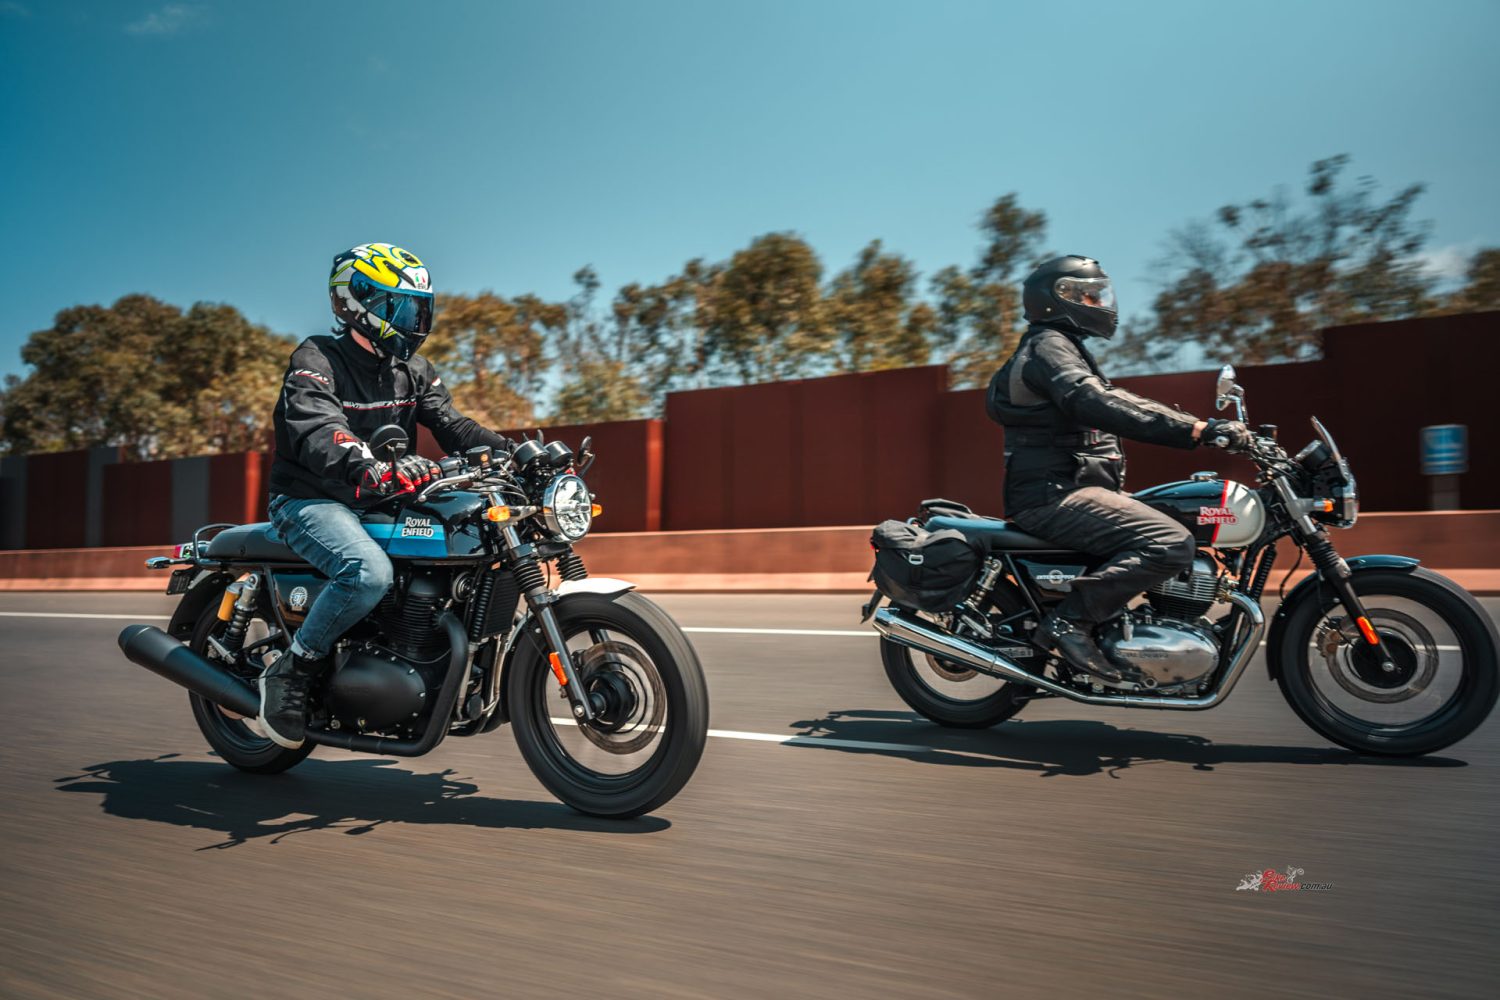 For those who are new to the 650 twins, the Continental GT adopts dropped-down clip-on handlebars, a scooped seat and a different-shaped tank over the long-flat seat, one-piece handlebars and a tear-drop-shaped tank on the Interceptor.